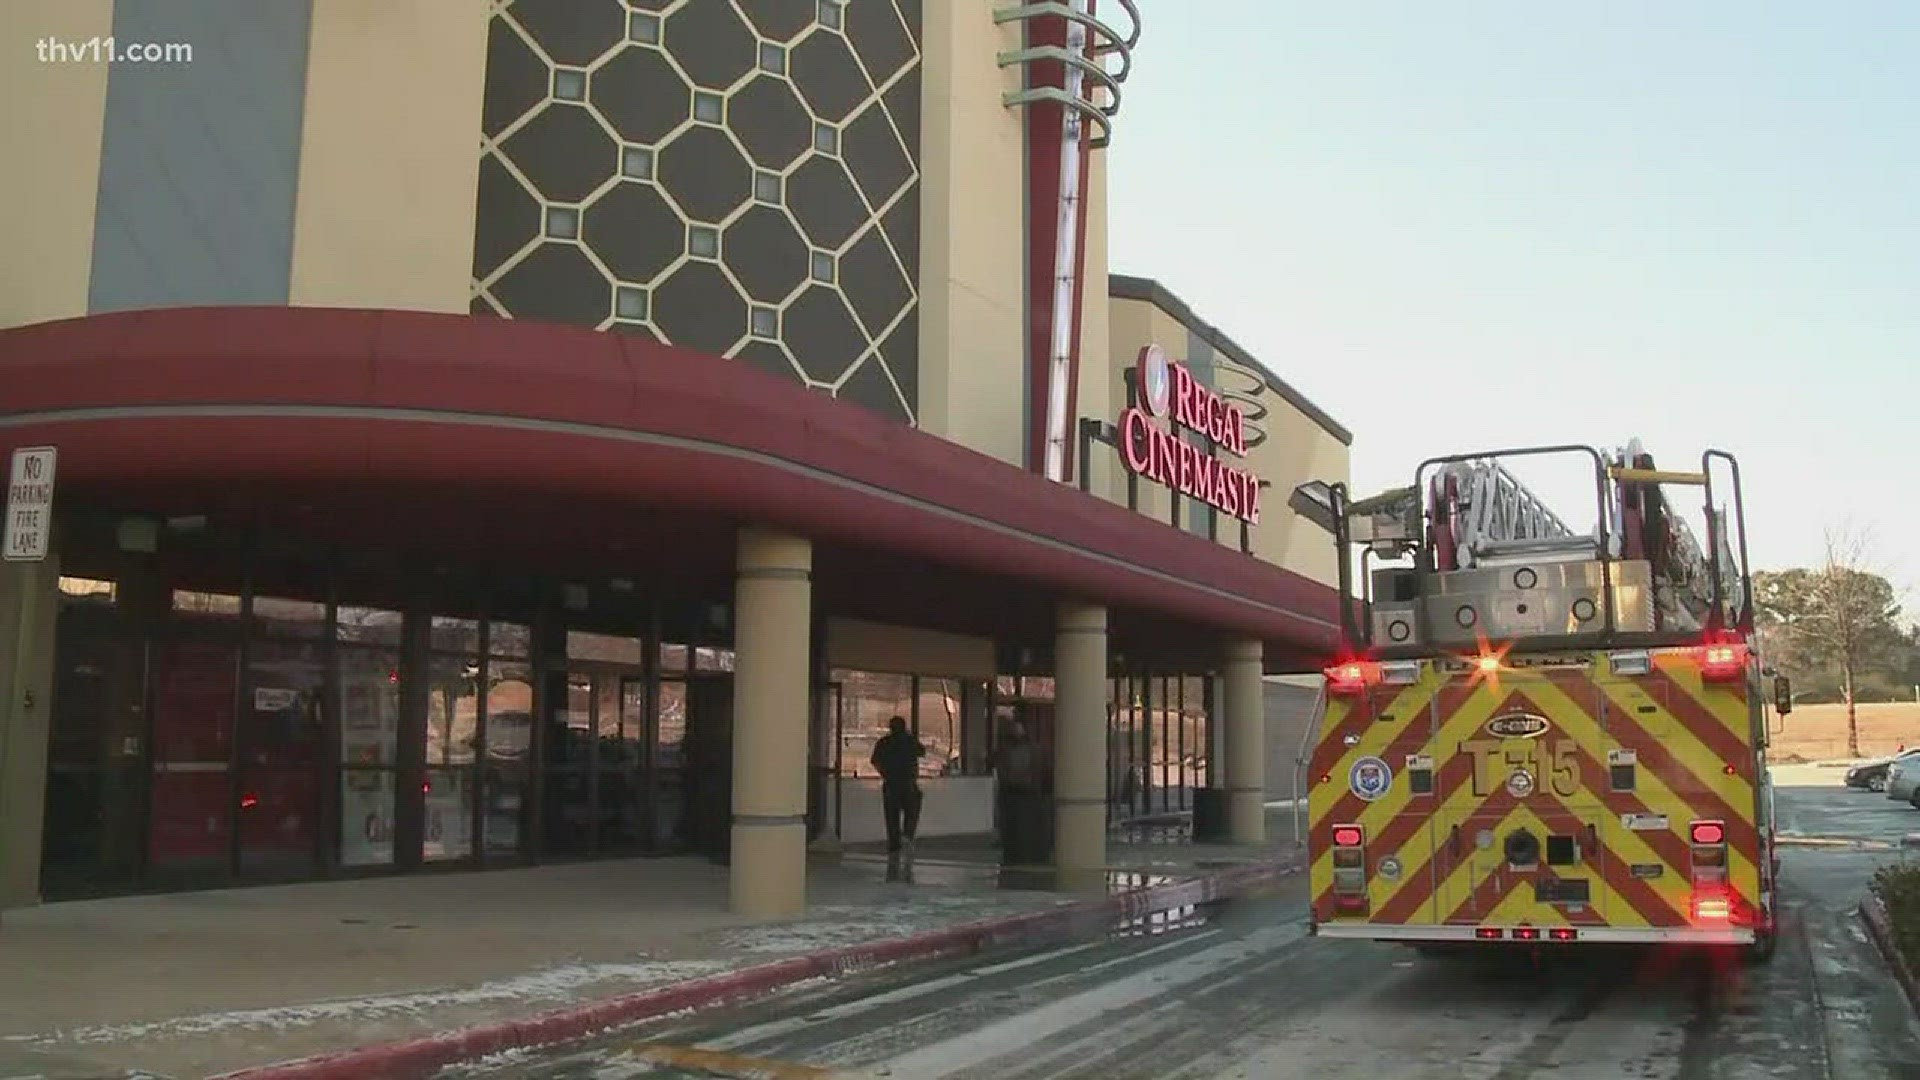 Two pipes burst, requiring the theater to close for the day and hand out vouchers.